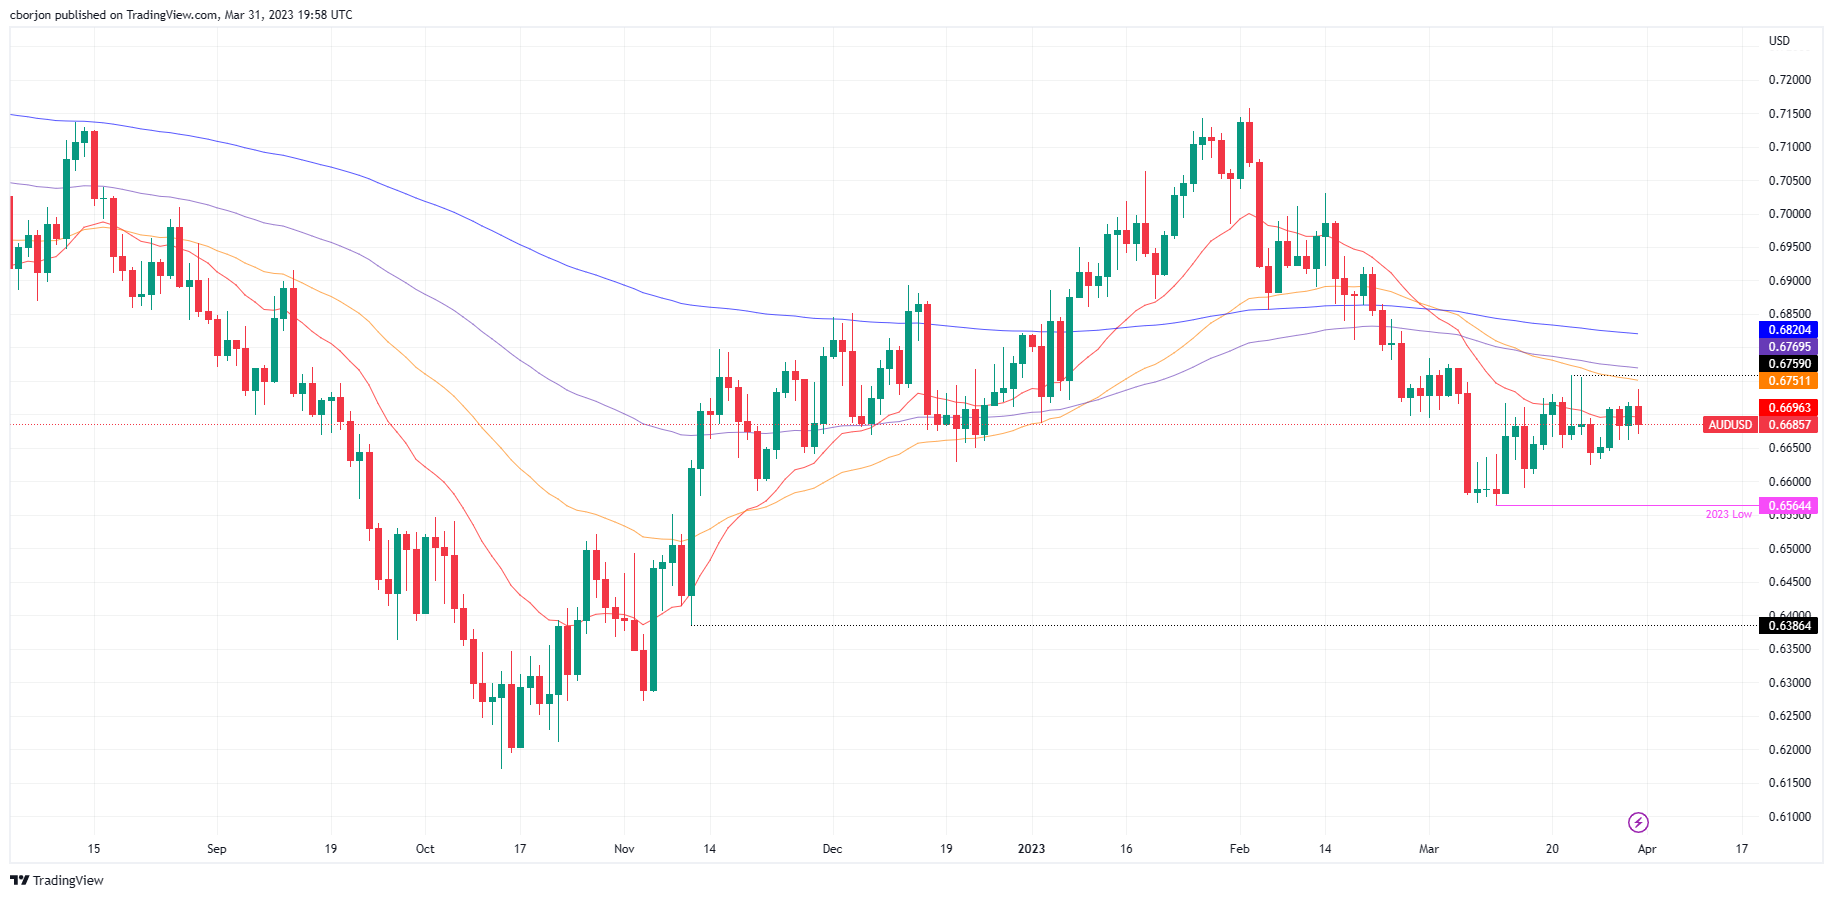 AUD/USD Daily chart